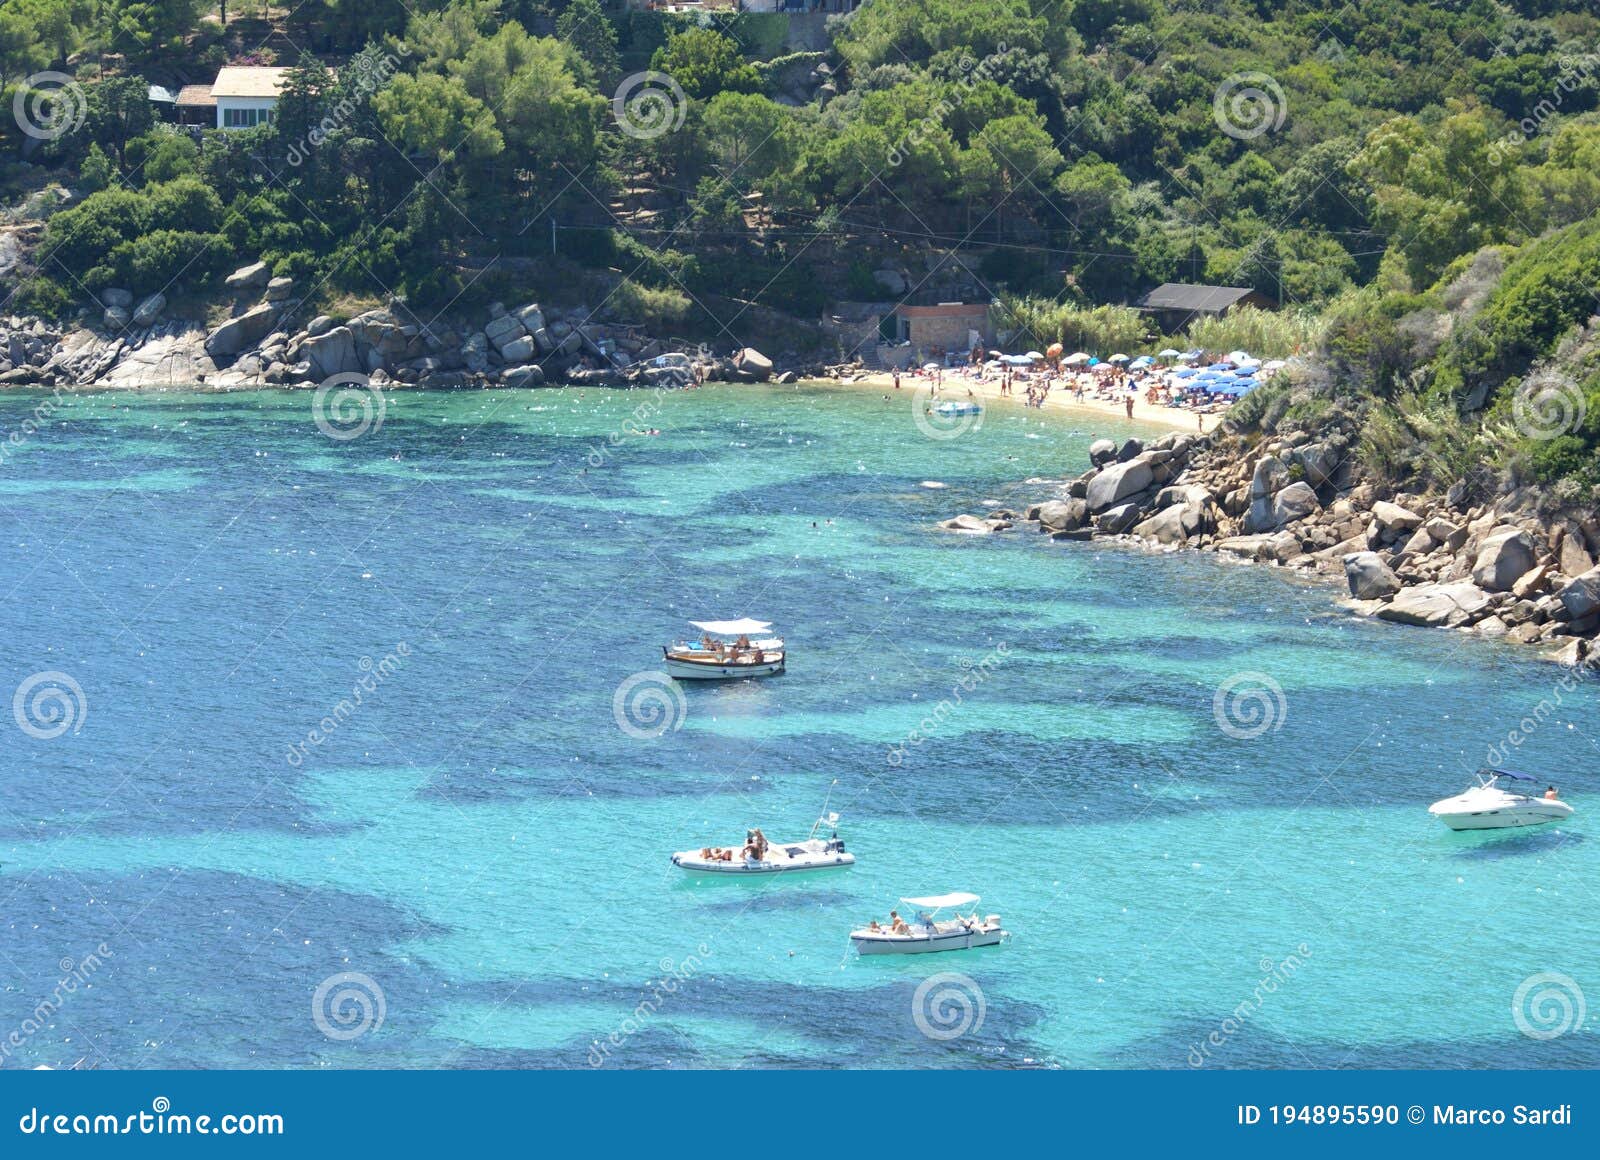 a view of caldane bay and beach in giglio island, italy